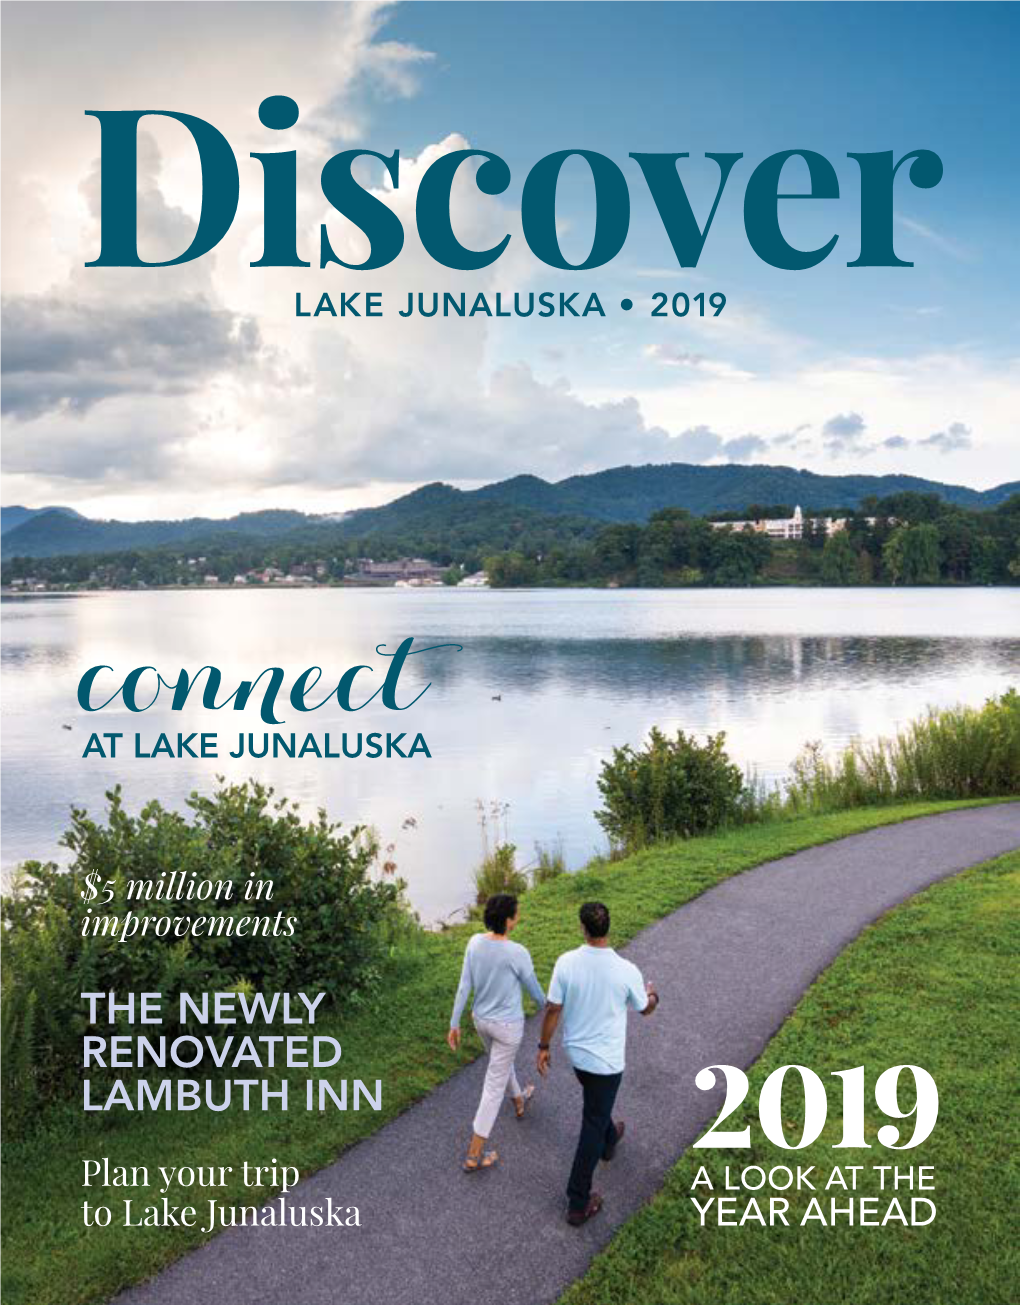 THE NEWLY RENOVATED LAMBUTH INN 2019 Plan Your Trip a LOOK at the to Lake Junaluska YEAR AHEAD 2 DISCOVER MAGAZINE · 2019 » Table of Contents